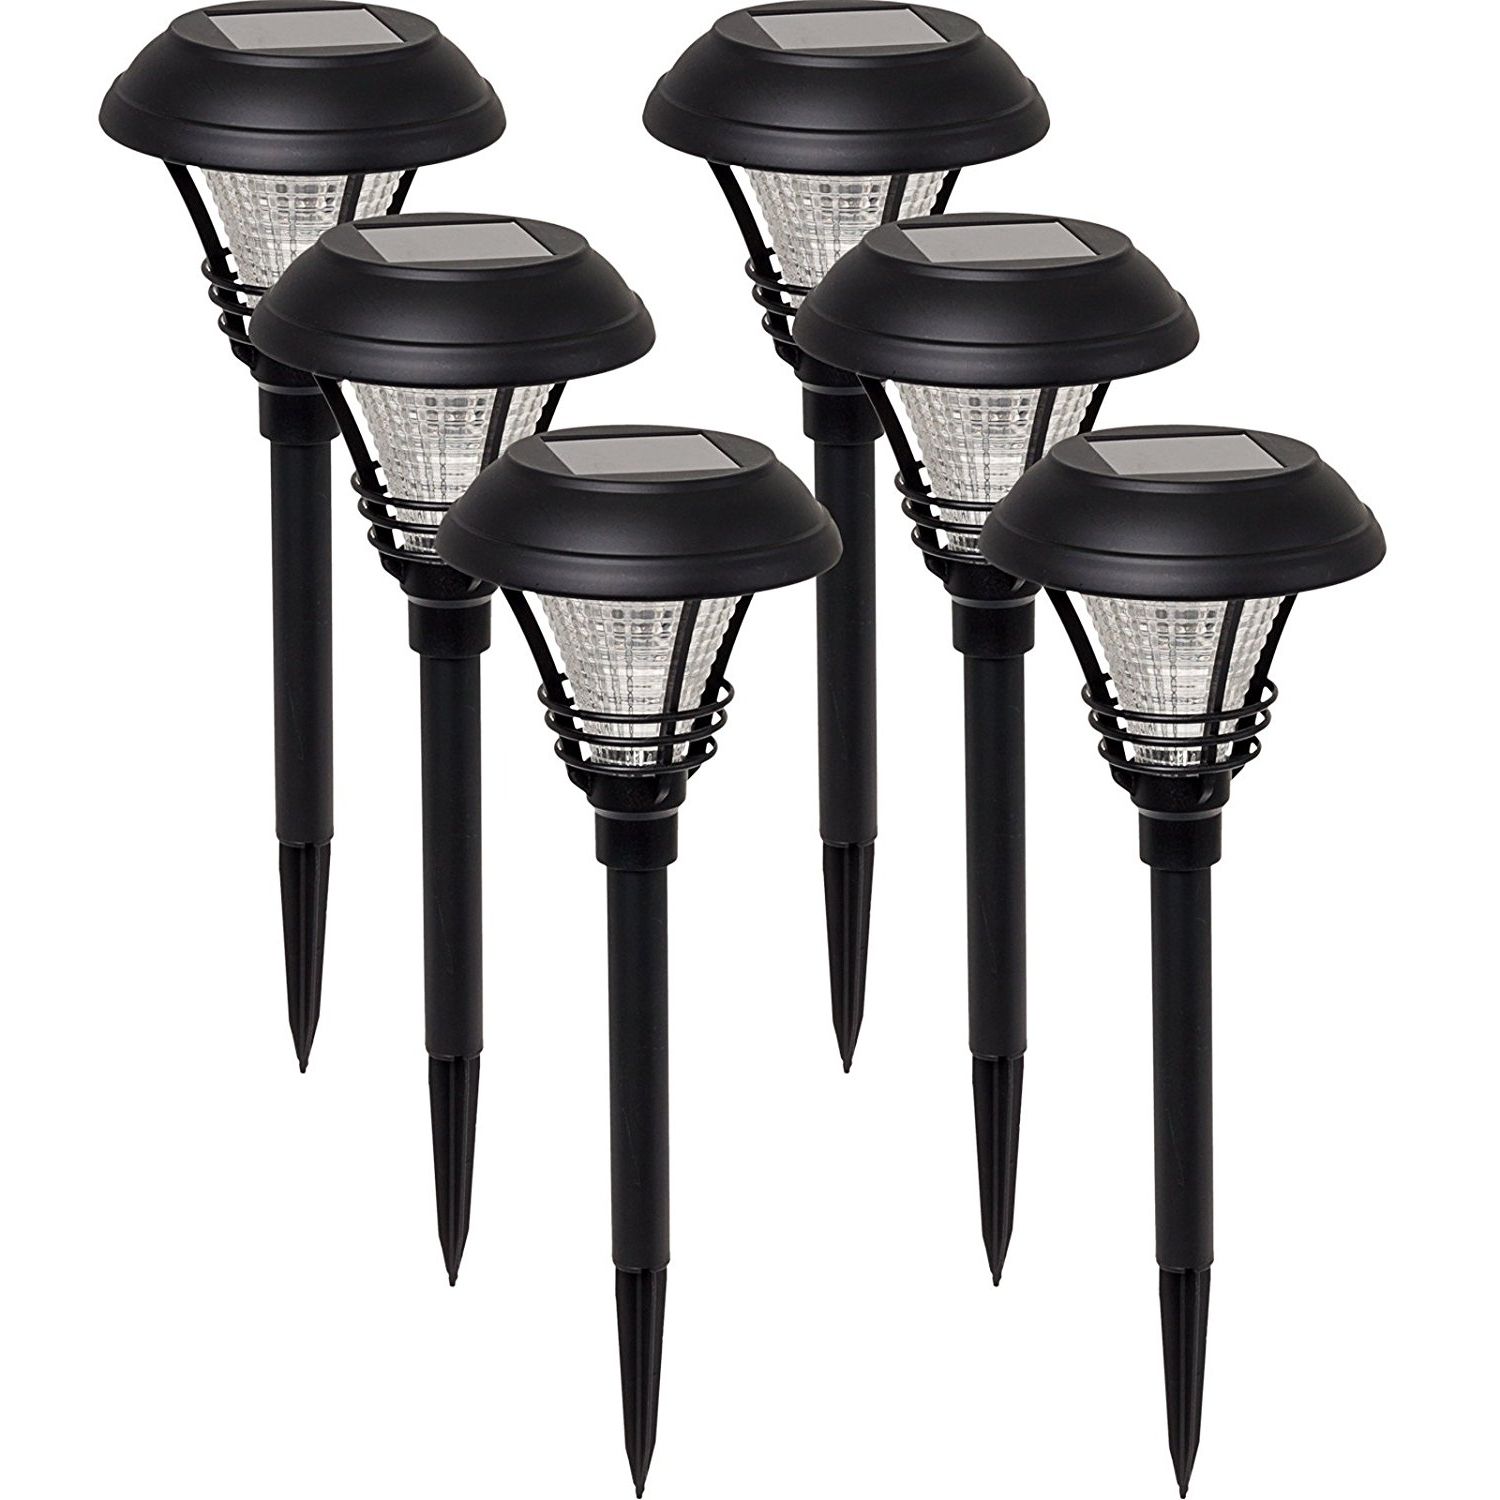 Current Lamps: Exciting Walmart Outdoor Lighting For Your Garden — Hasmut With Regard To Walmart Outdoor Lanterns (View 15 of 20)